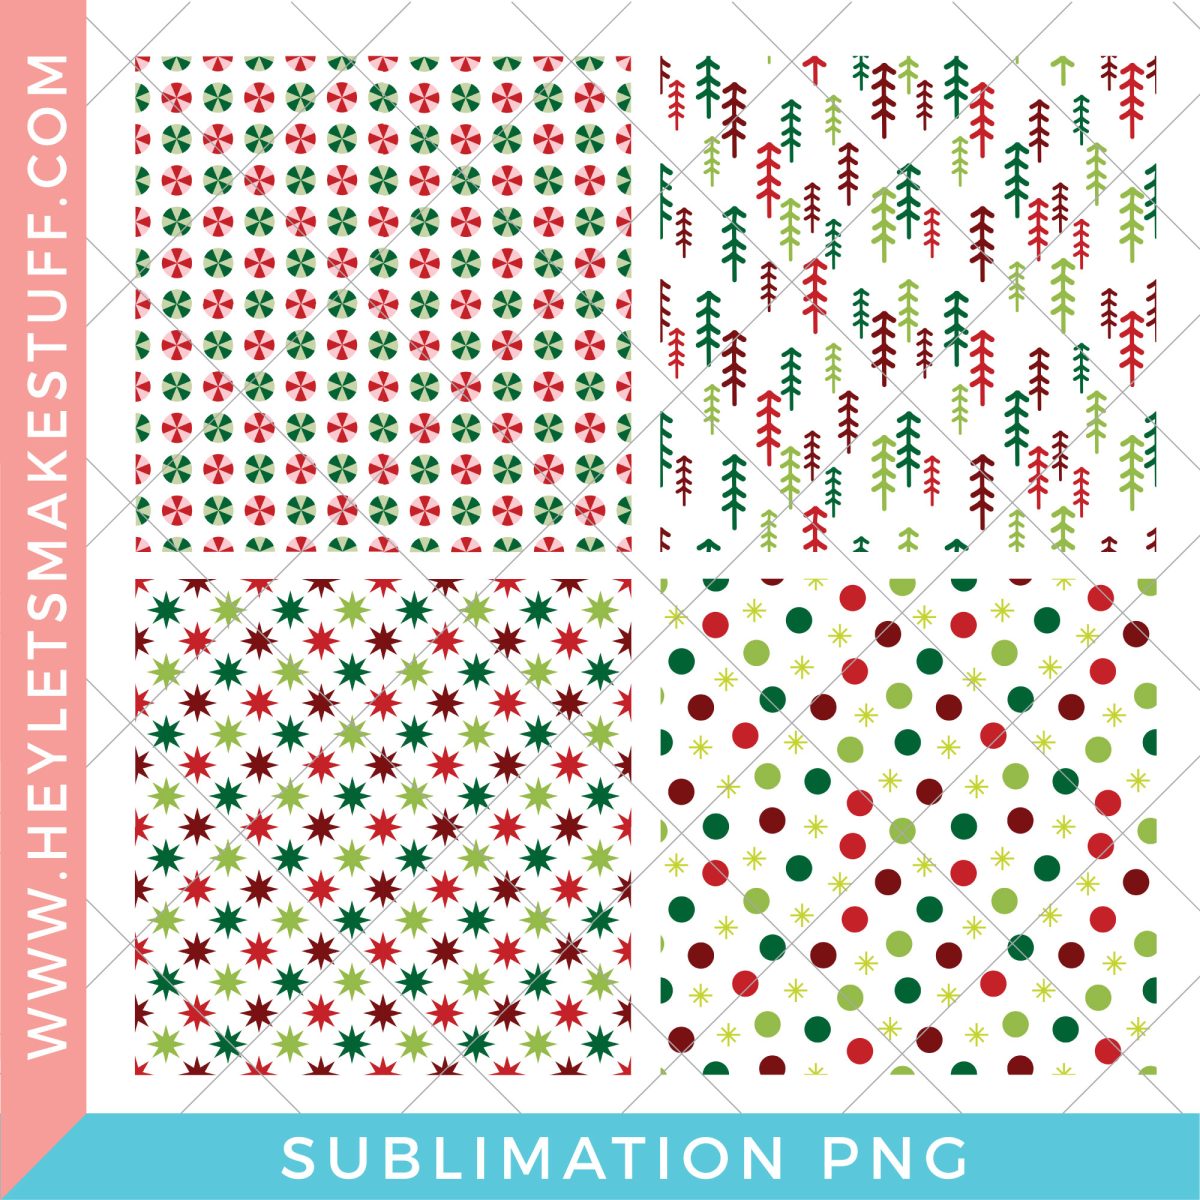 Four traditional Christmas patterns in red and green: peppermints, trees, starbursts, and polka dots